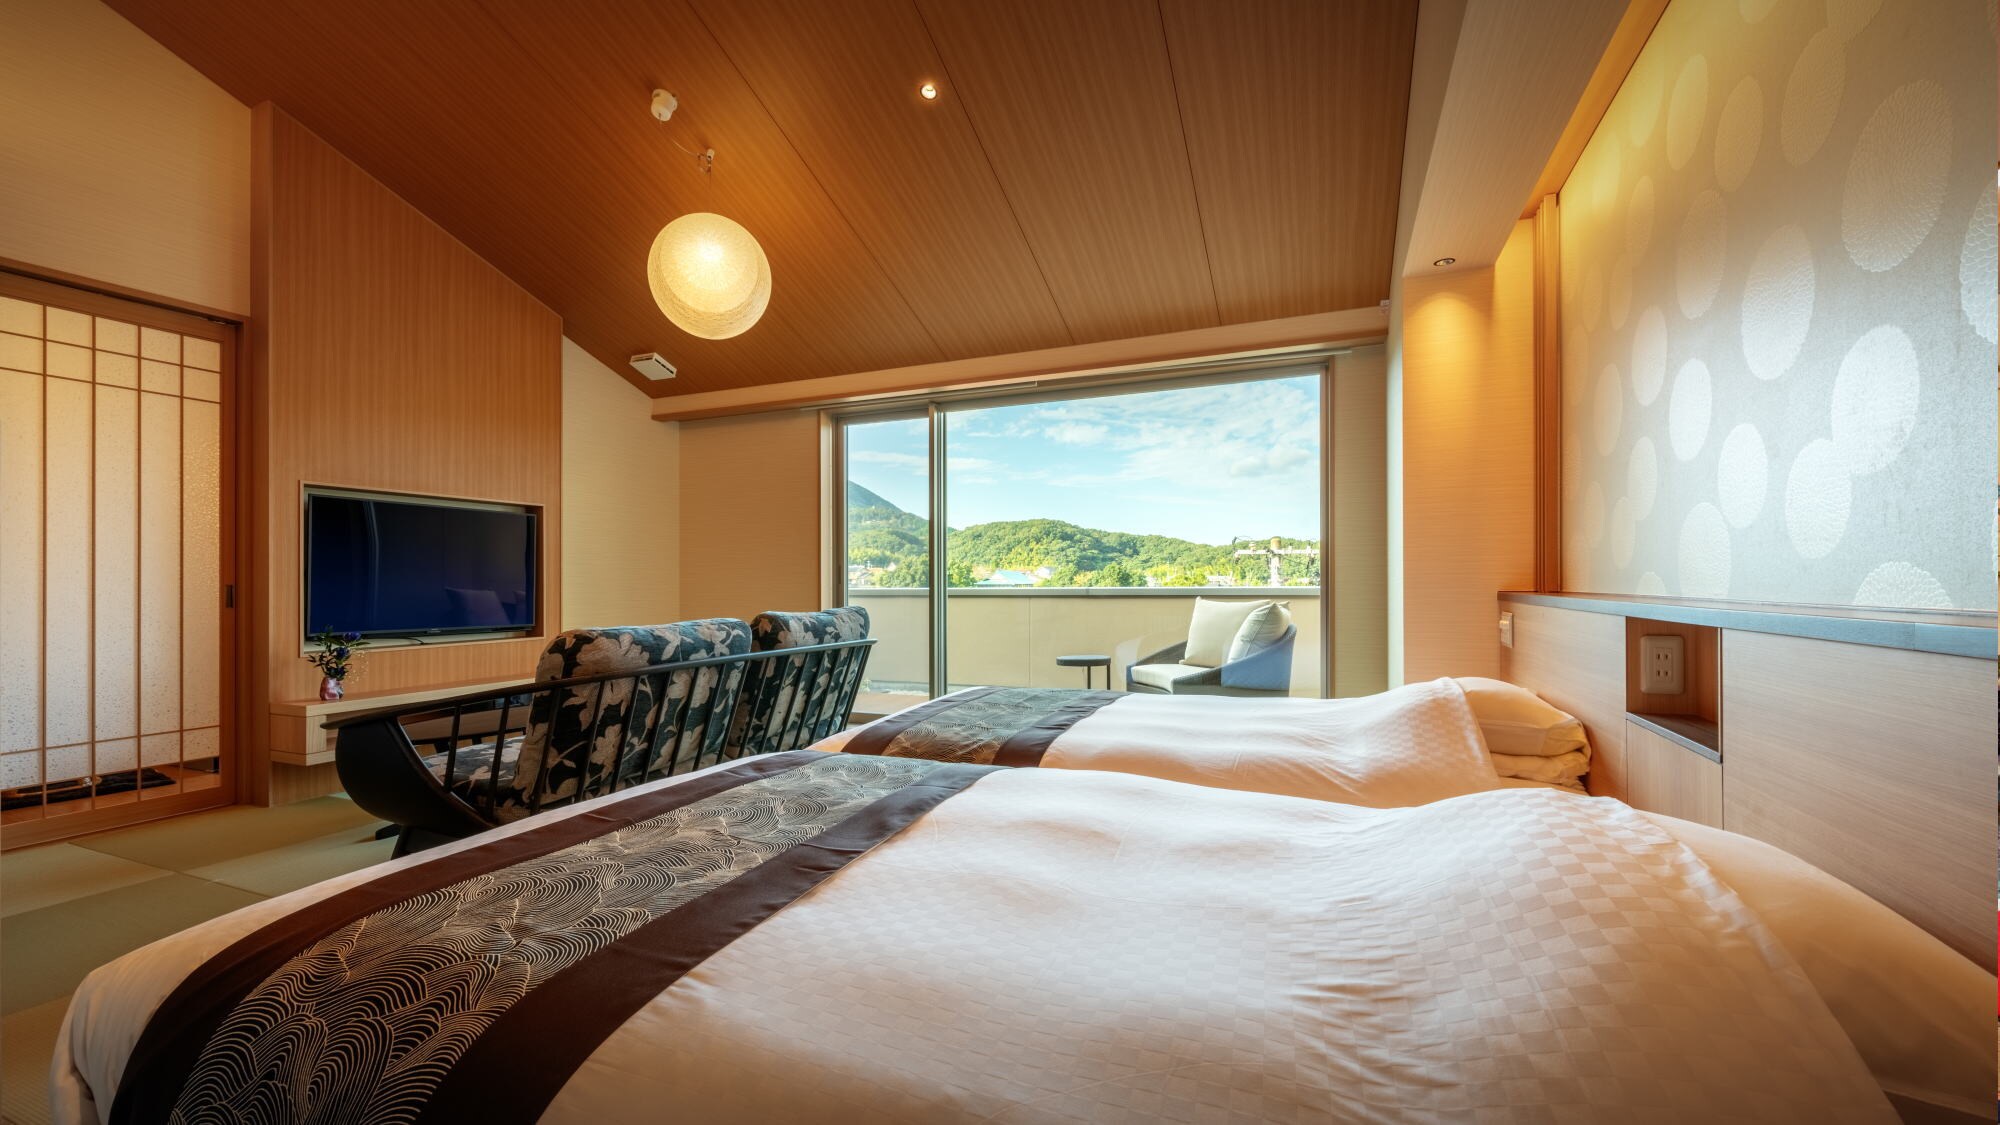 OPEN on October 8, 2020! Guest room "Hanayu" with a semi-open-air bath